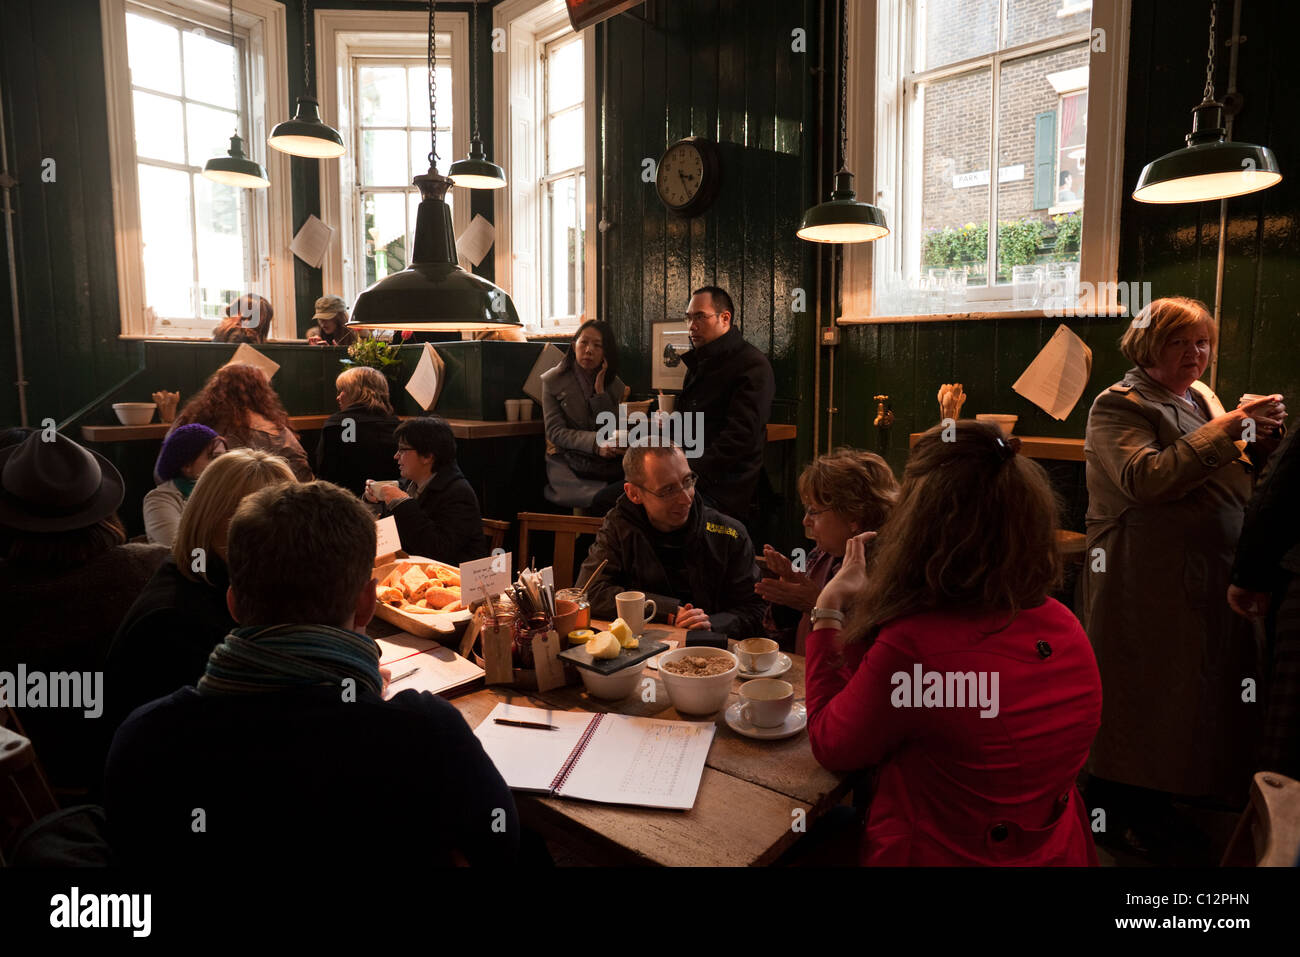 Coffee drinkers gathered around the central table at Monmouth Coffee shop at the Burough Market, London. Stock Photo